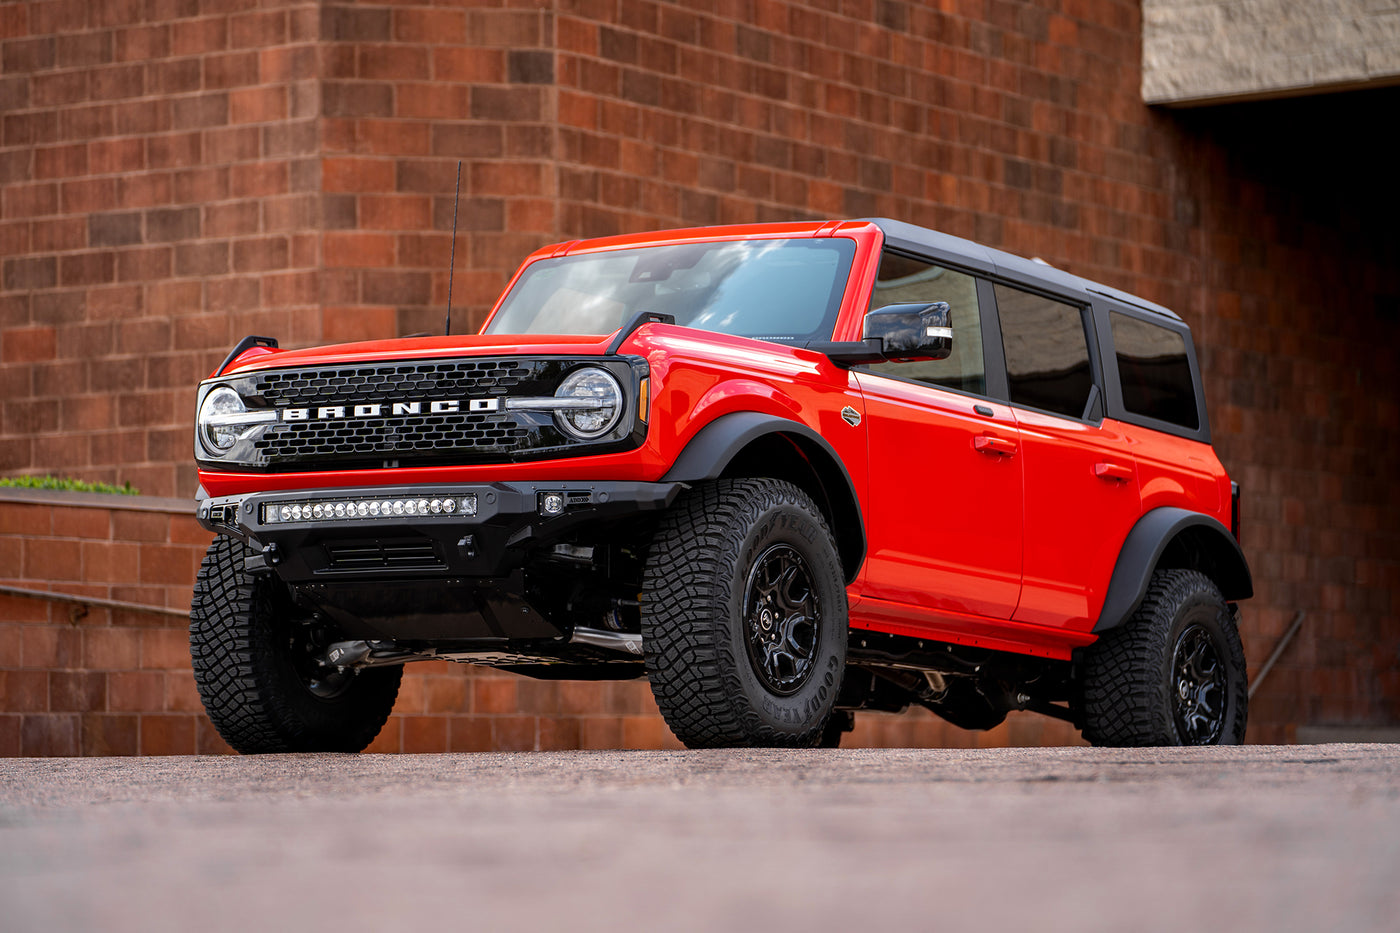 We've Released our Stealth Fighter Front Bumper for the 2021 Bronco